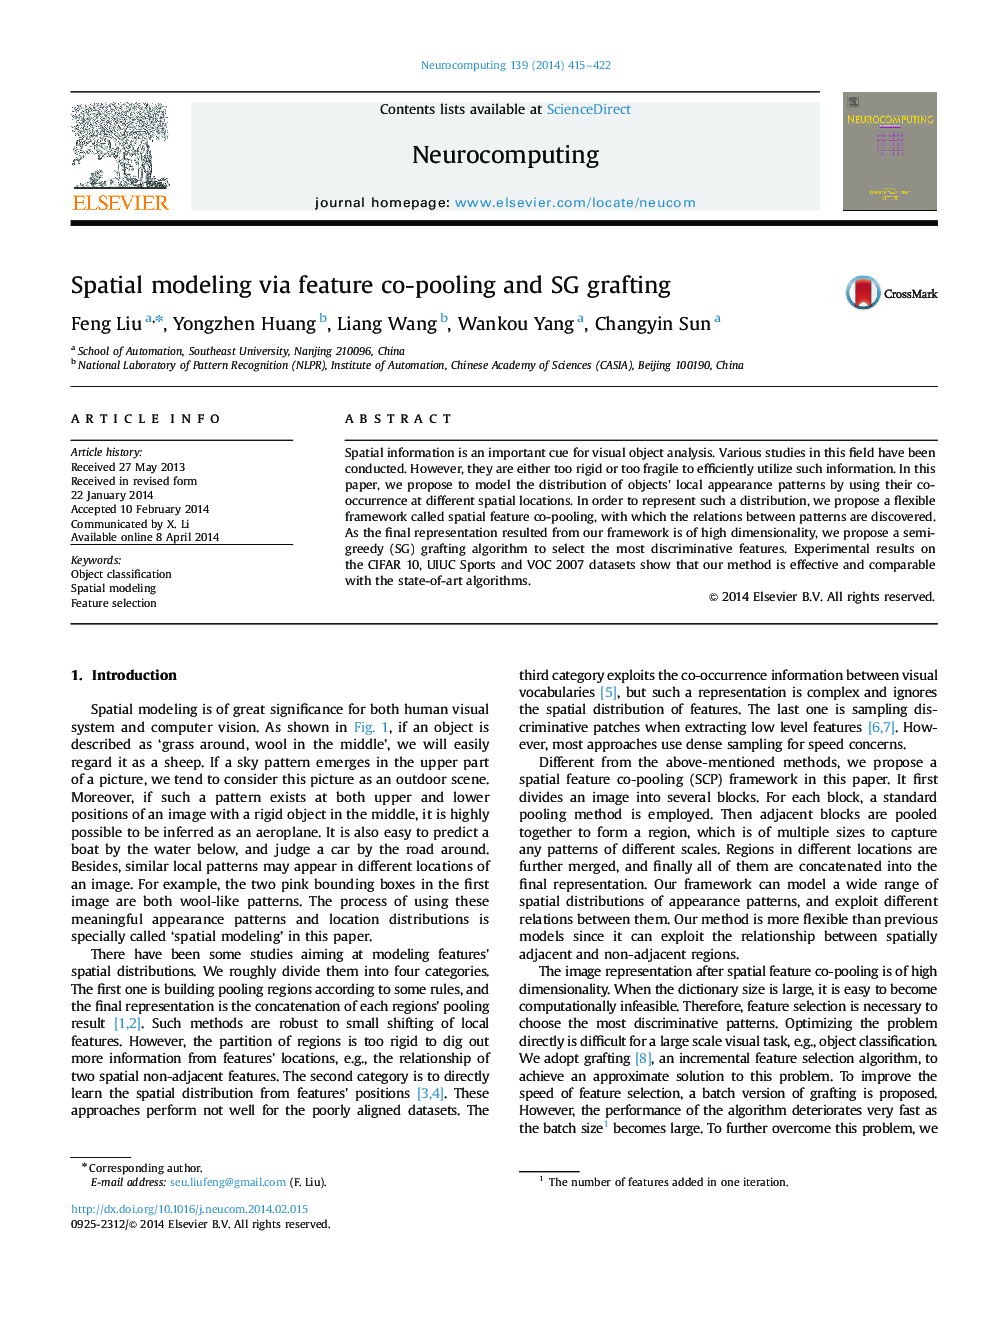 Spatial modeling via feature co-pooling and SG grafting